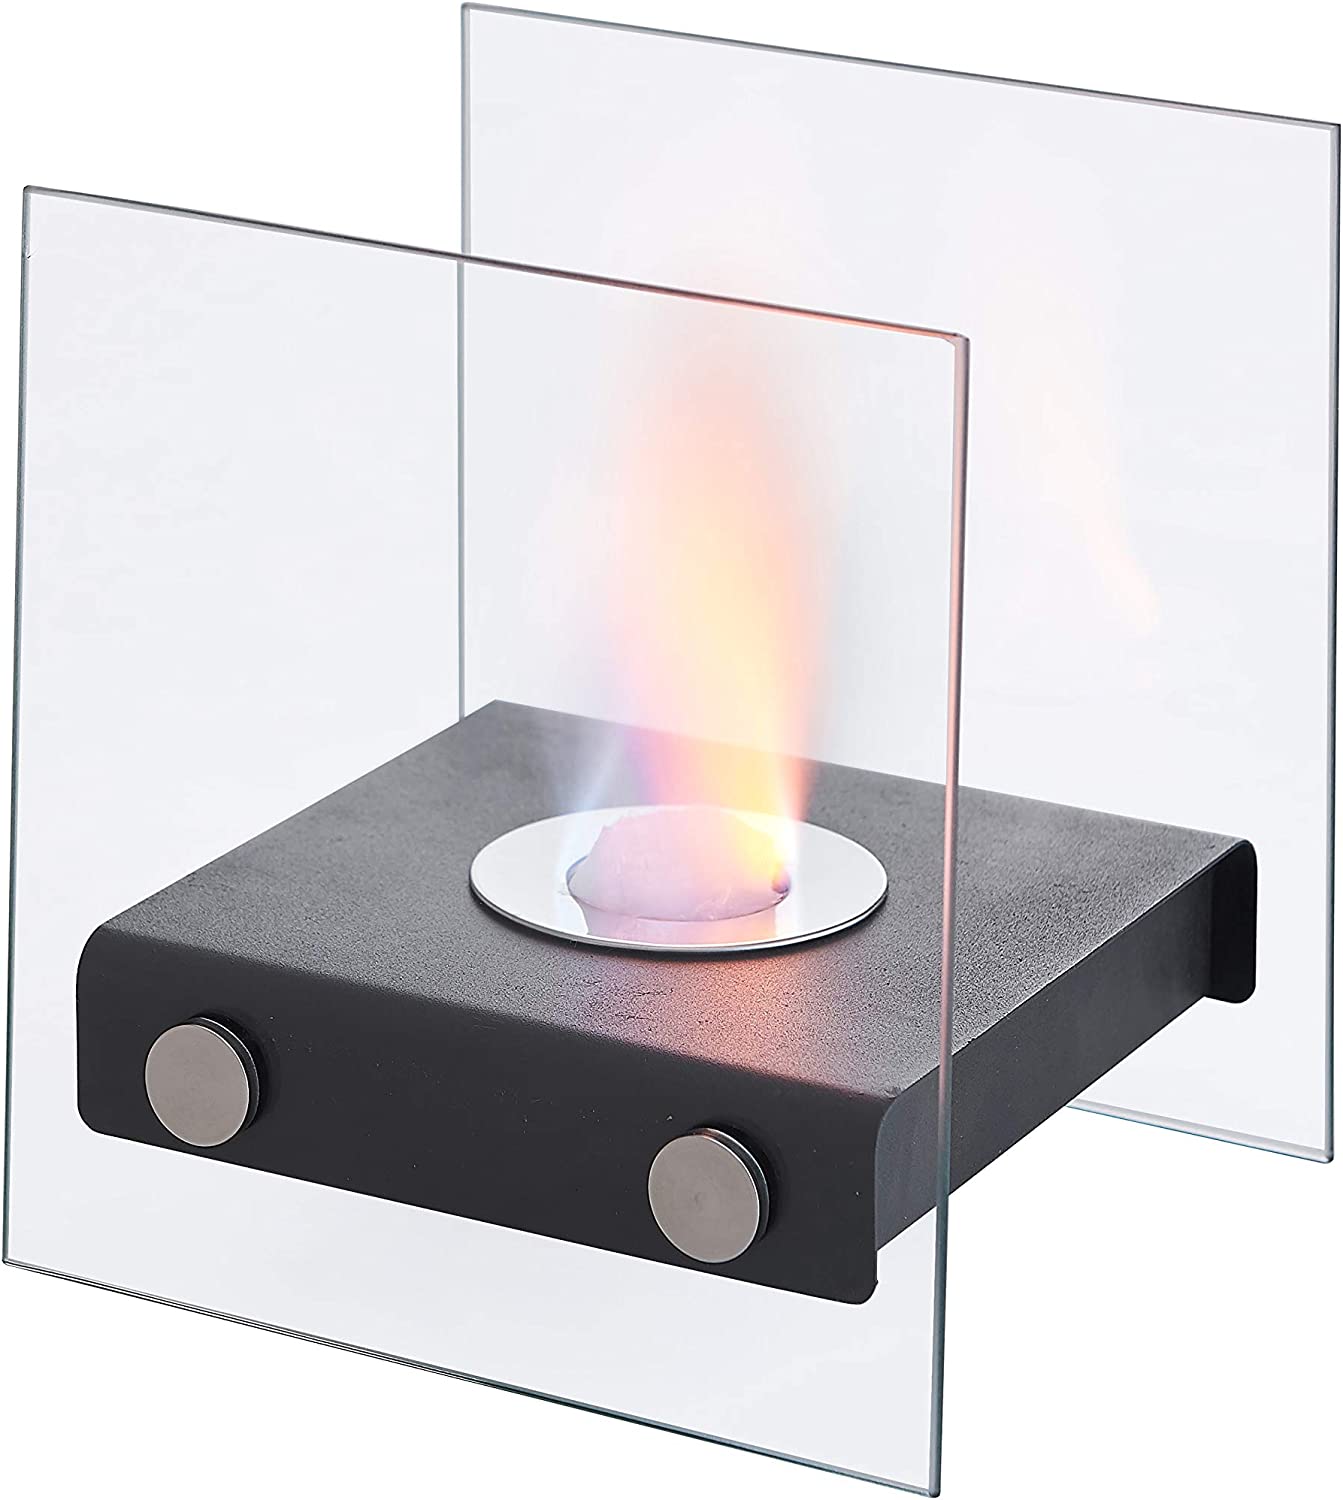 Square Tabletop Fireplace（2glass）